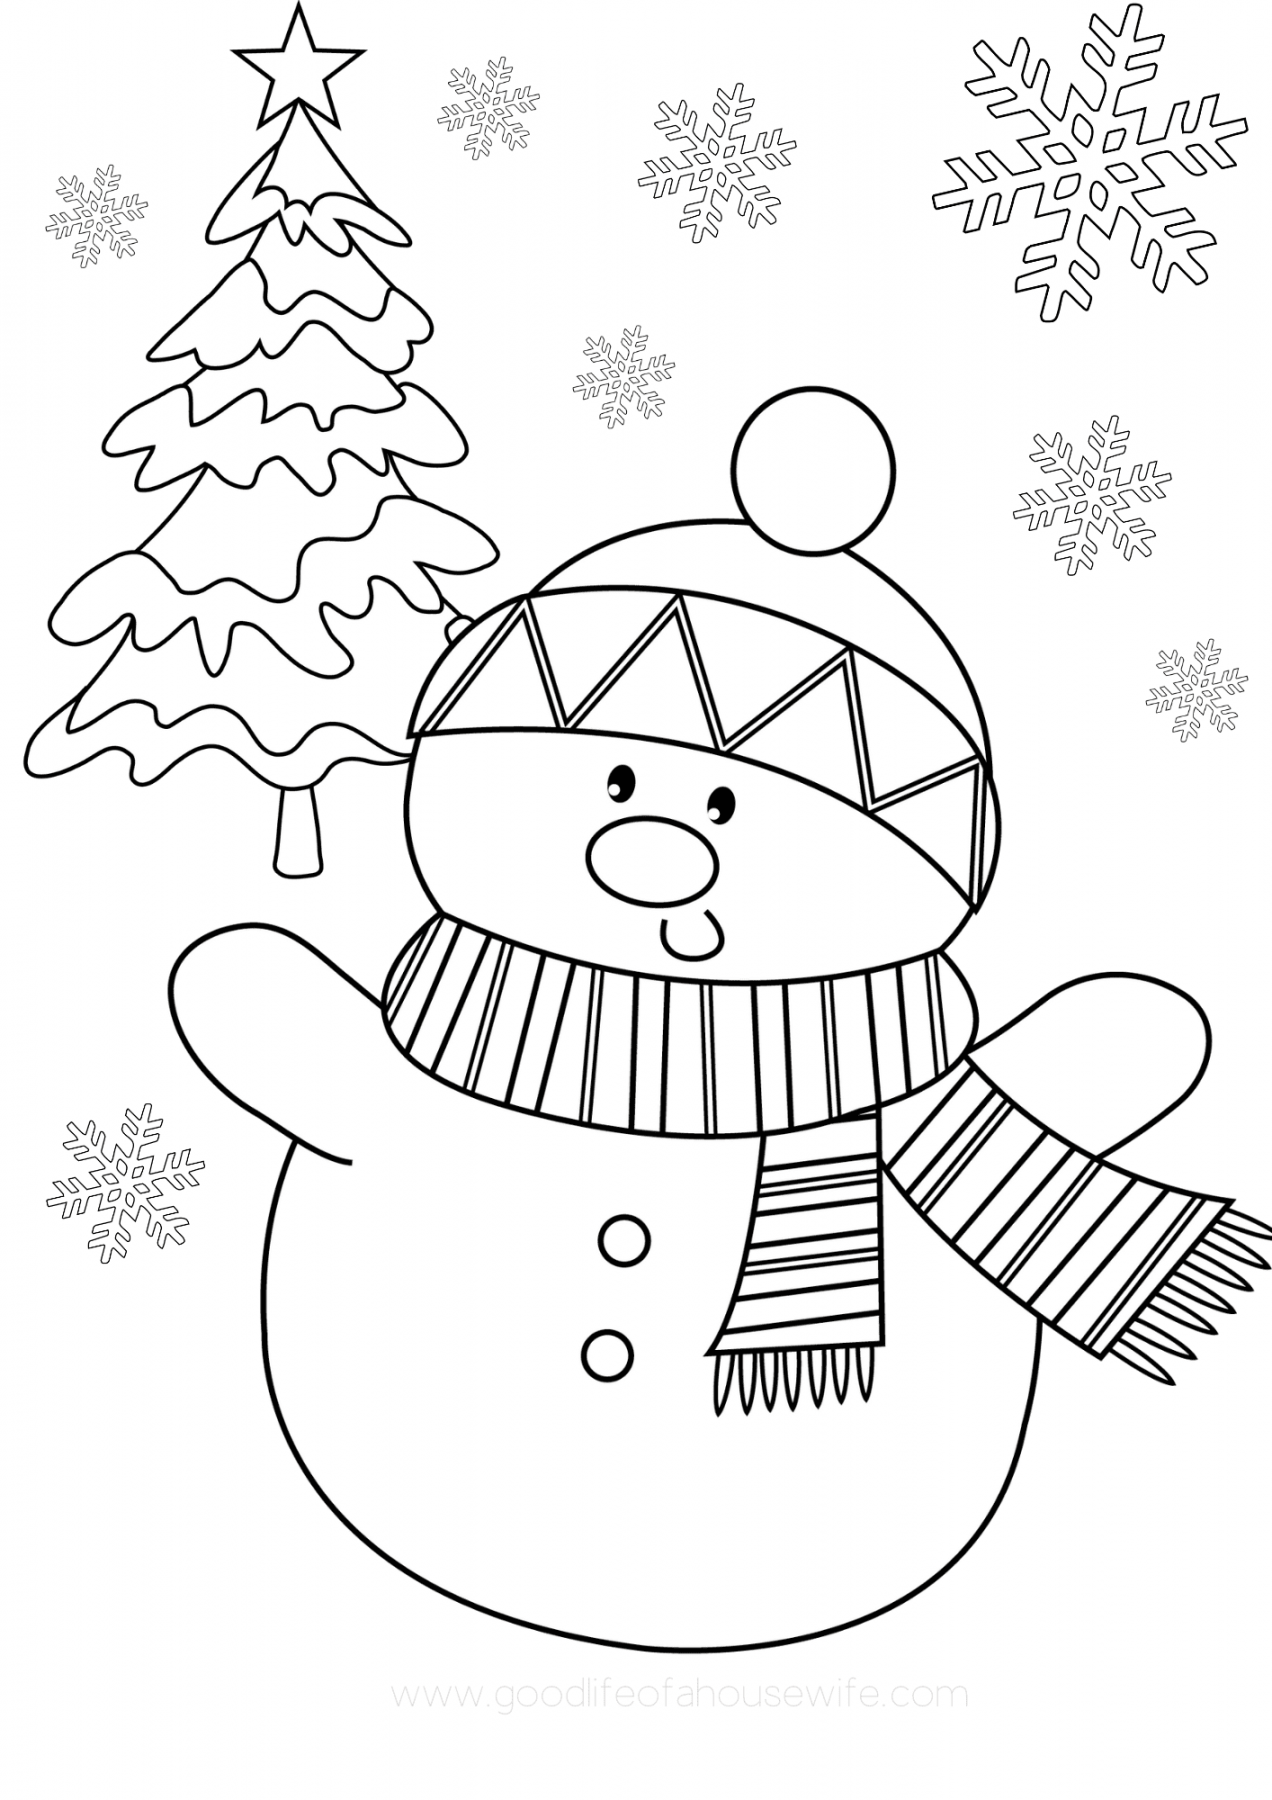 Christmas Coloring Pages Printable Free - Printable - Free Printable Christmas Coloring Pages - Good Life of a Housewife